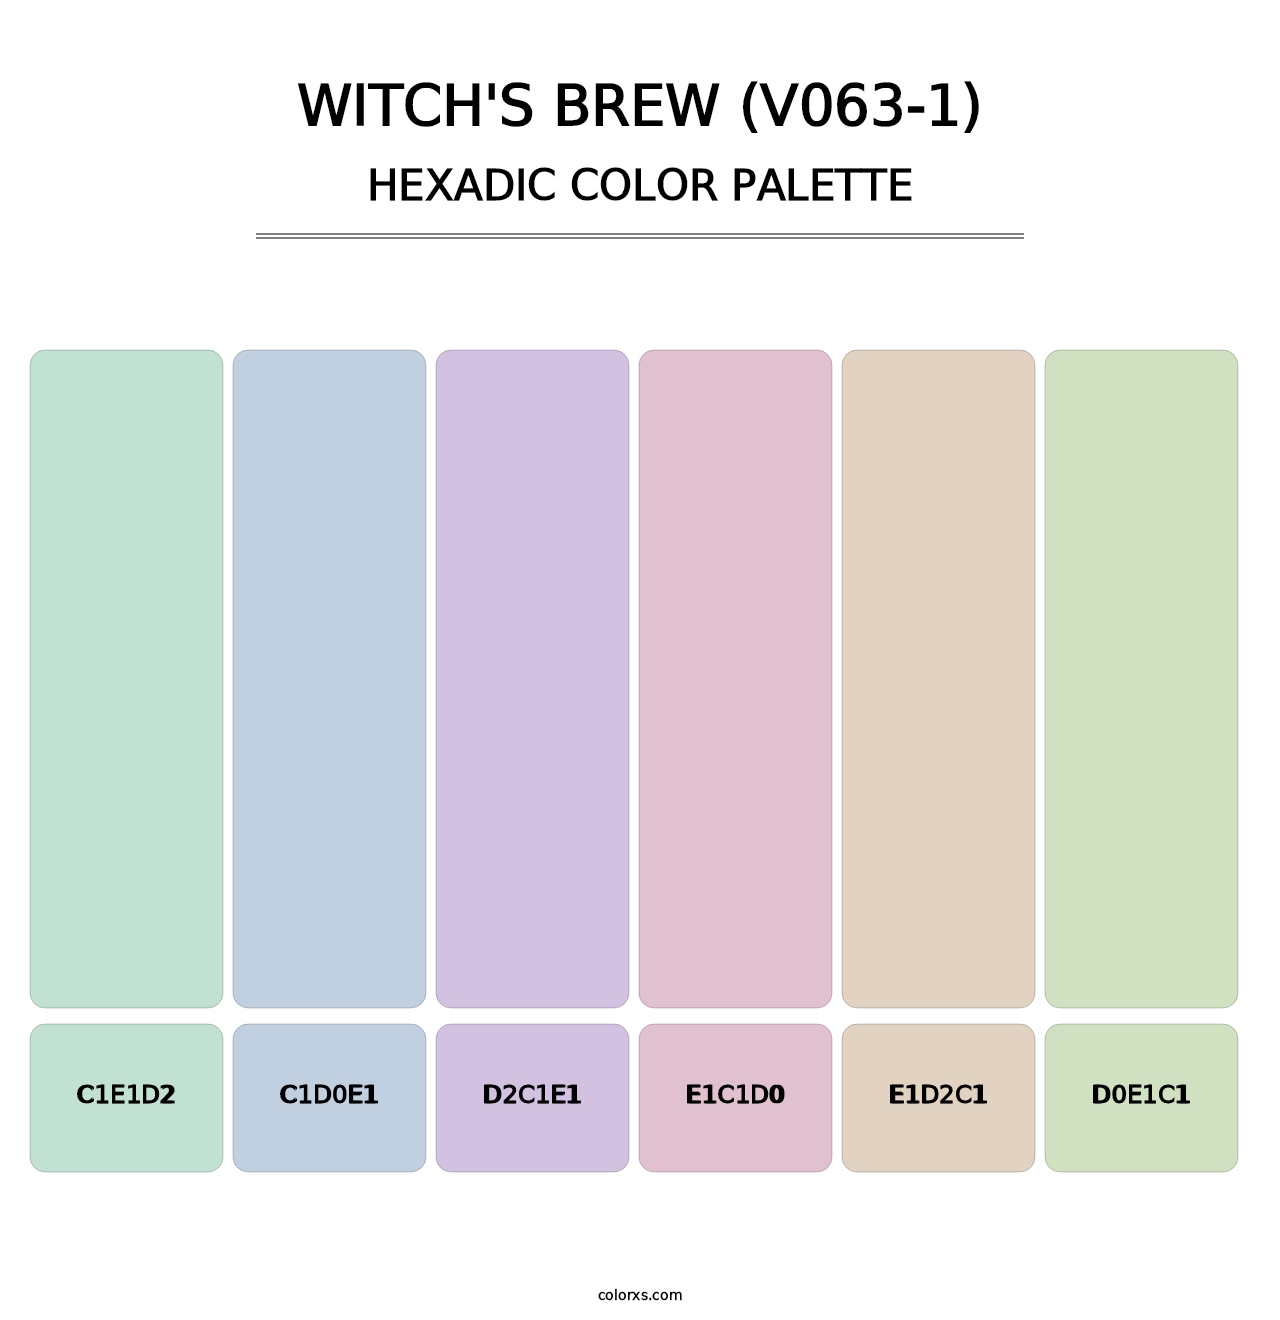 Witch's Brew (V063-1) - Hexadic Color Palette